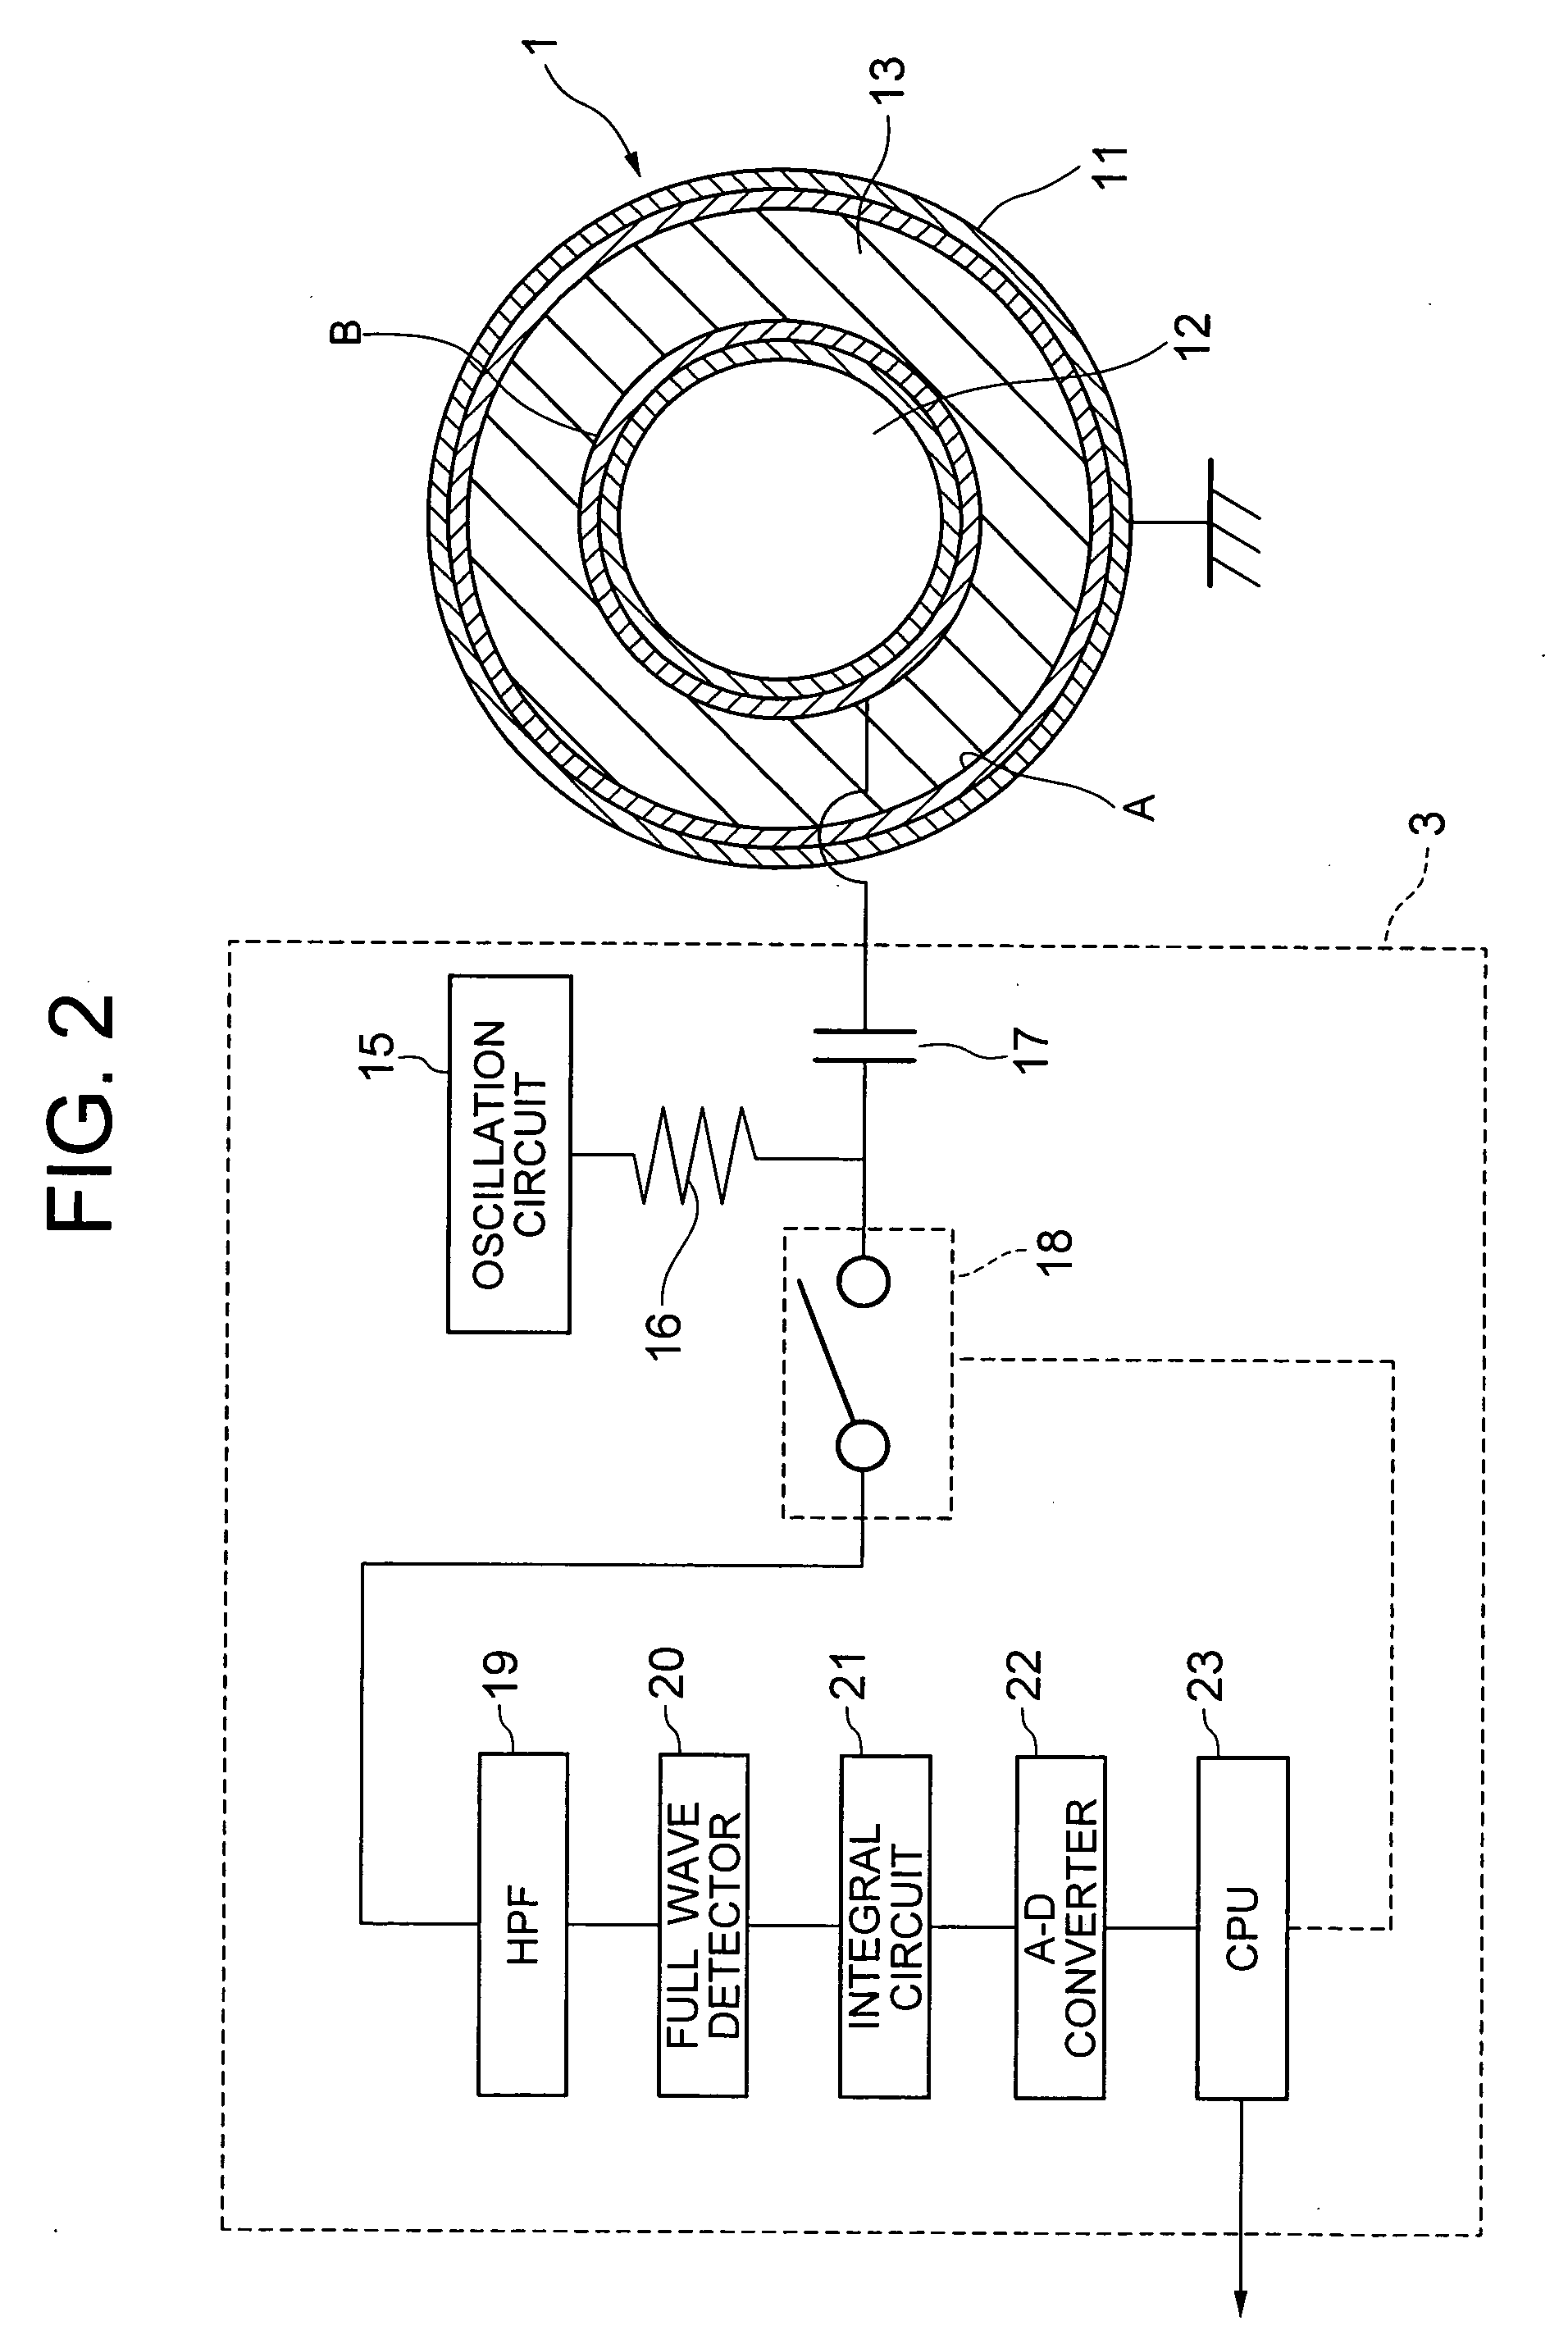 Operating device for on-vehicle equipment